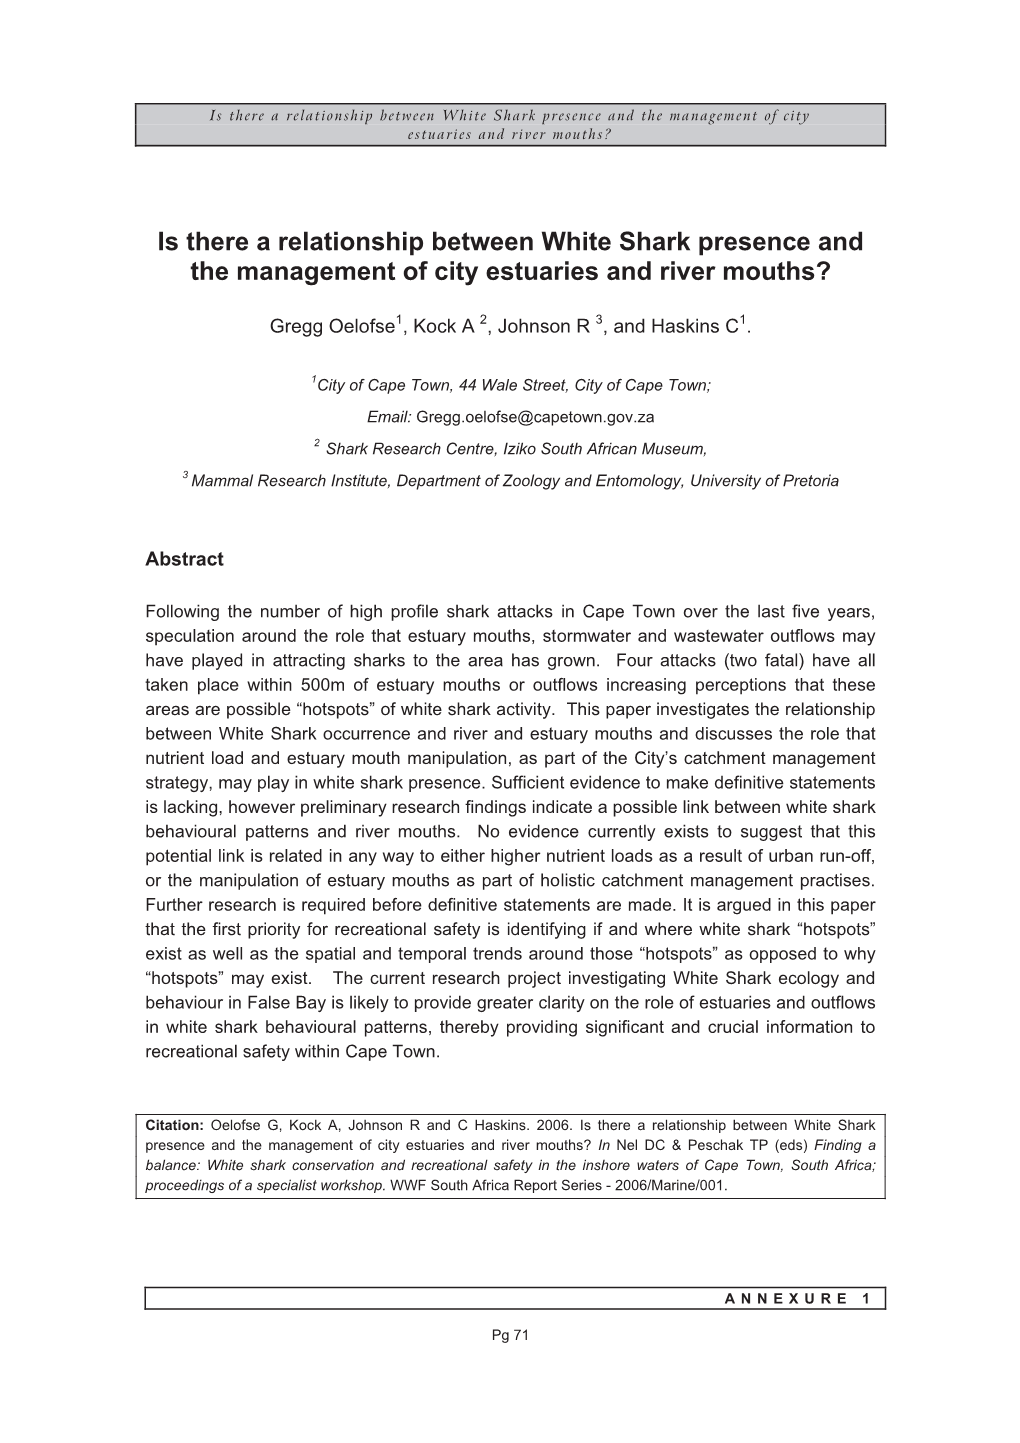 Is There a Relationship Between White Shark Presence and the Management of City Estuaries and River Mouths?